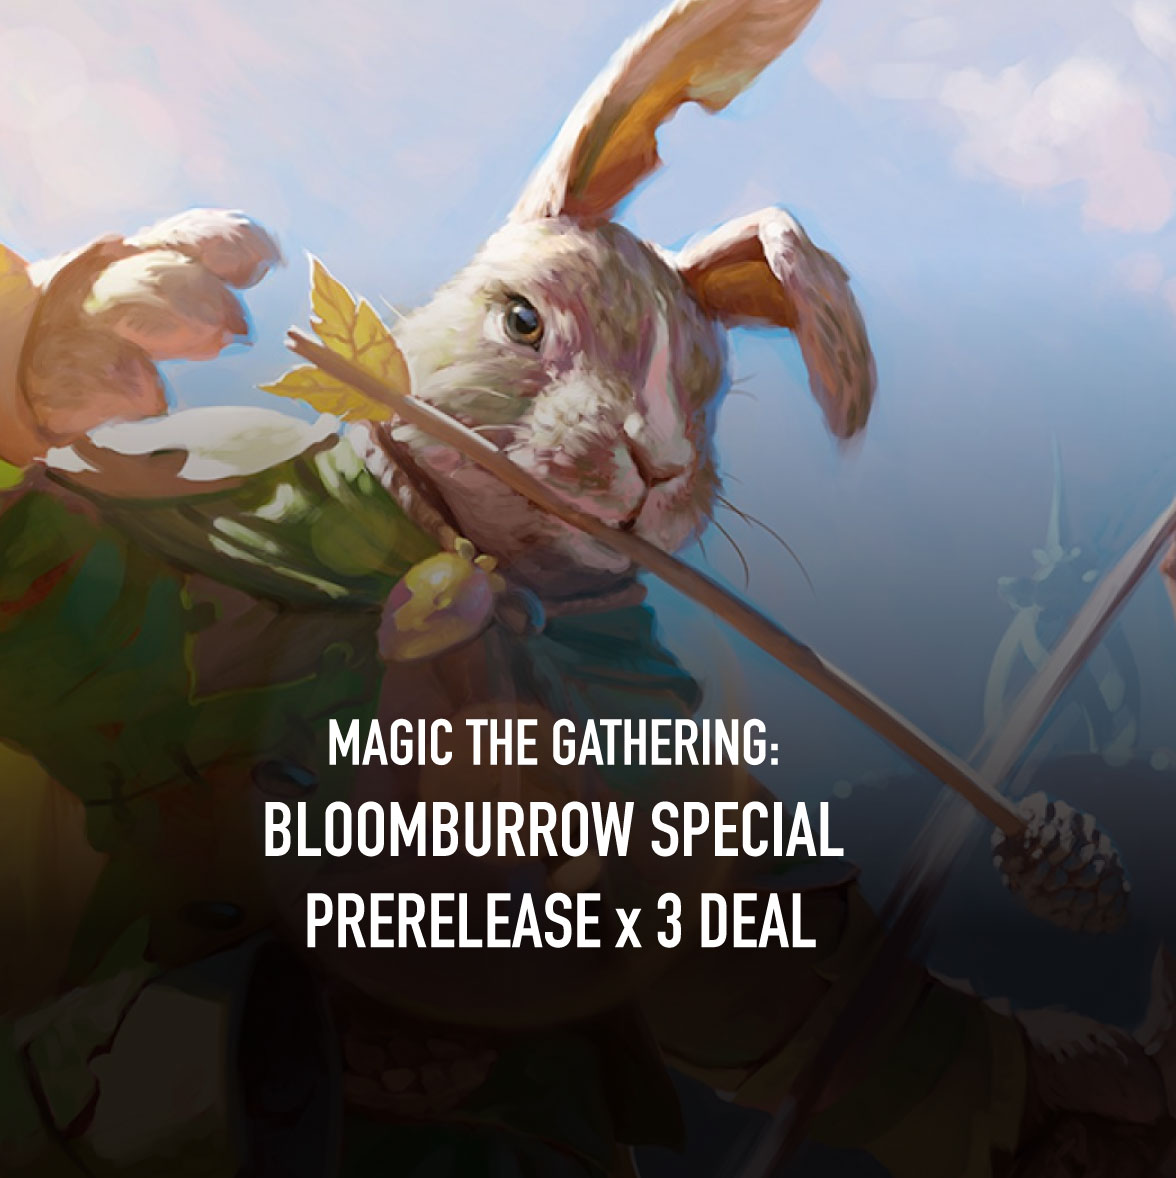 MAGIC THE GATHERING: BLOOMBURROW – SPECIAL PRERELEASE x 3 DEAL